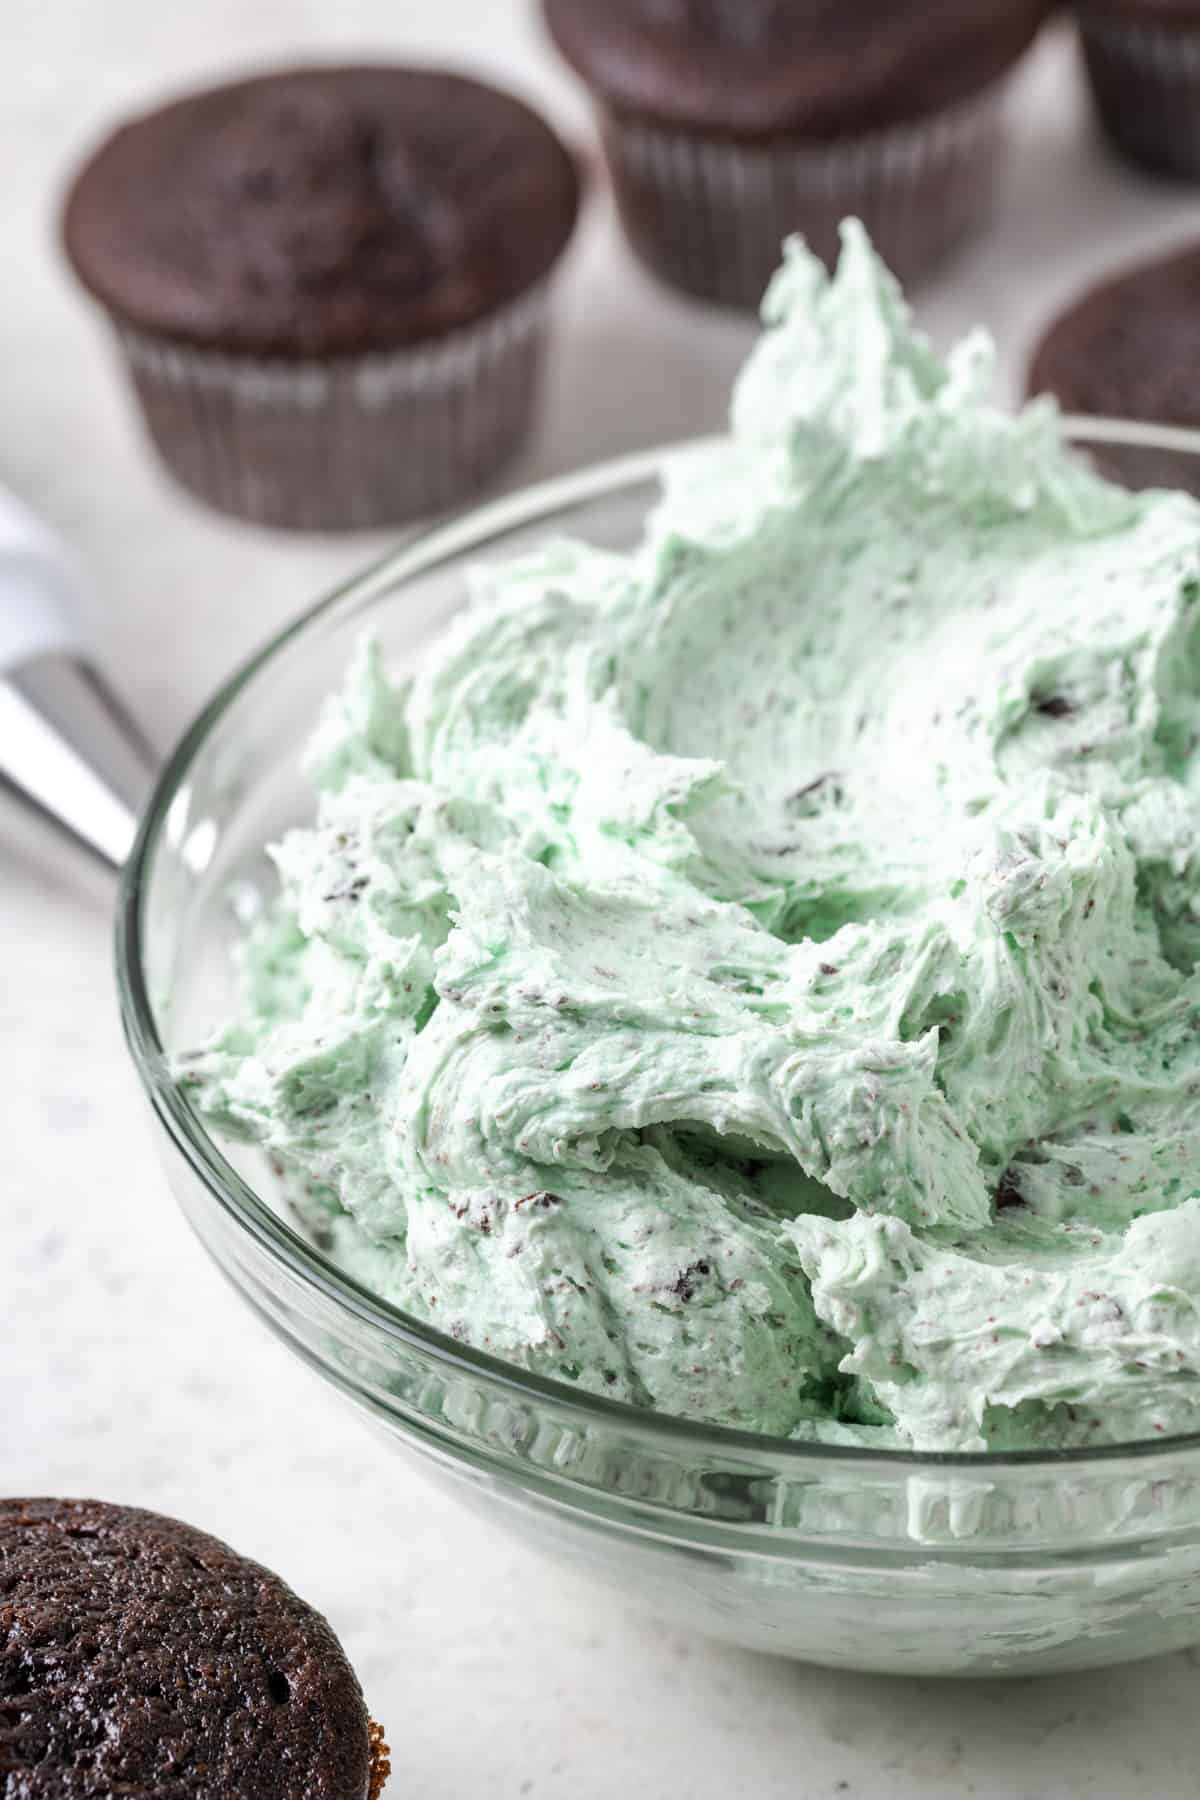 A bowl of mint chocolate chip buttercream frosting sitting beside some plain chocolate cupcakes.